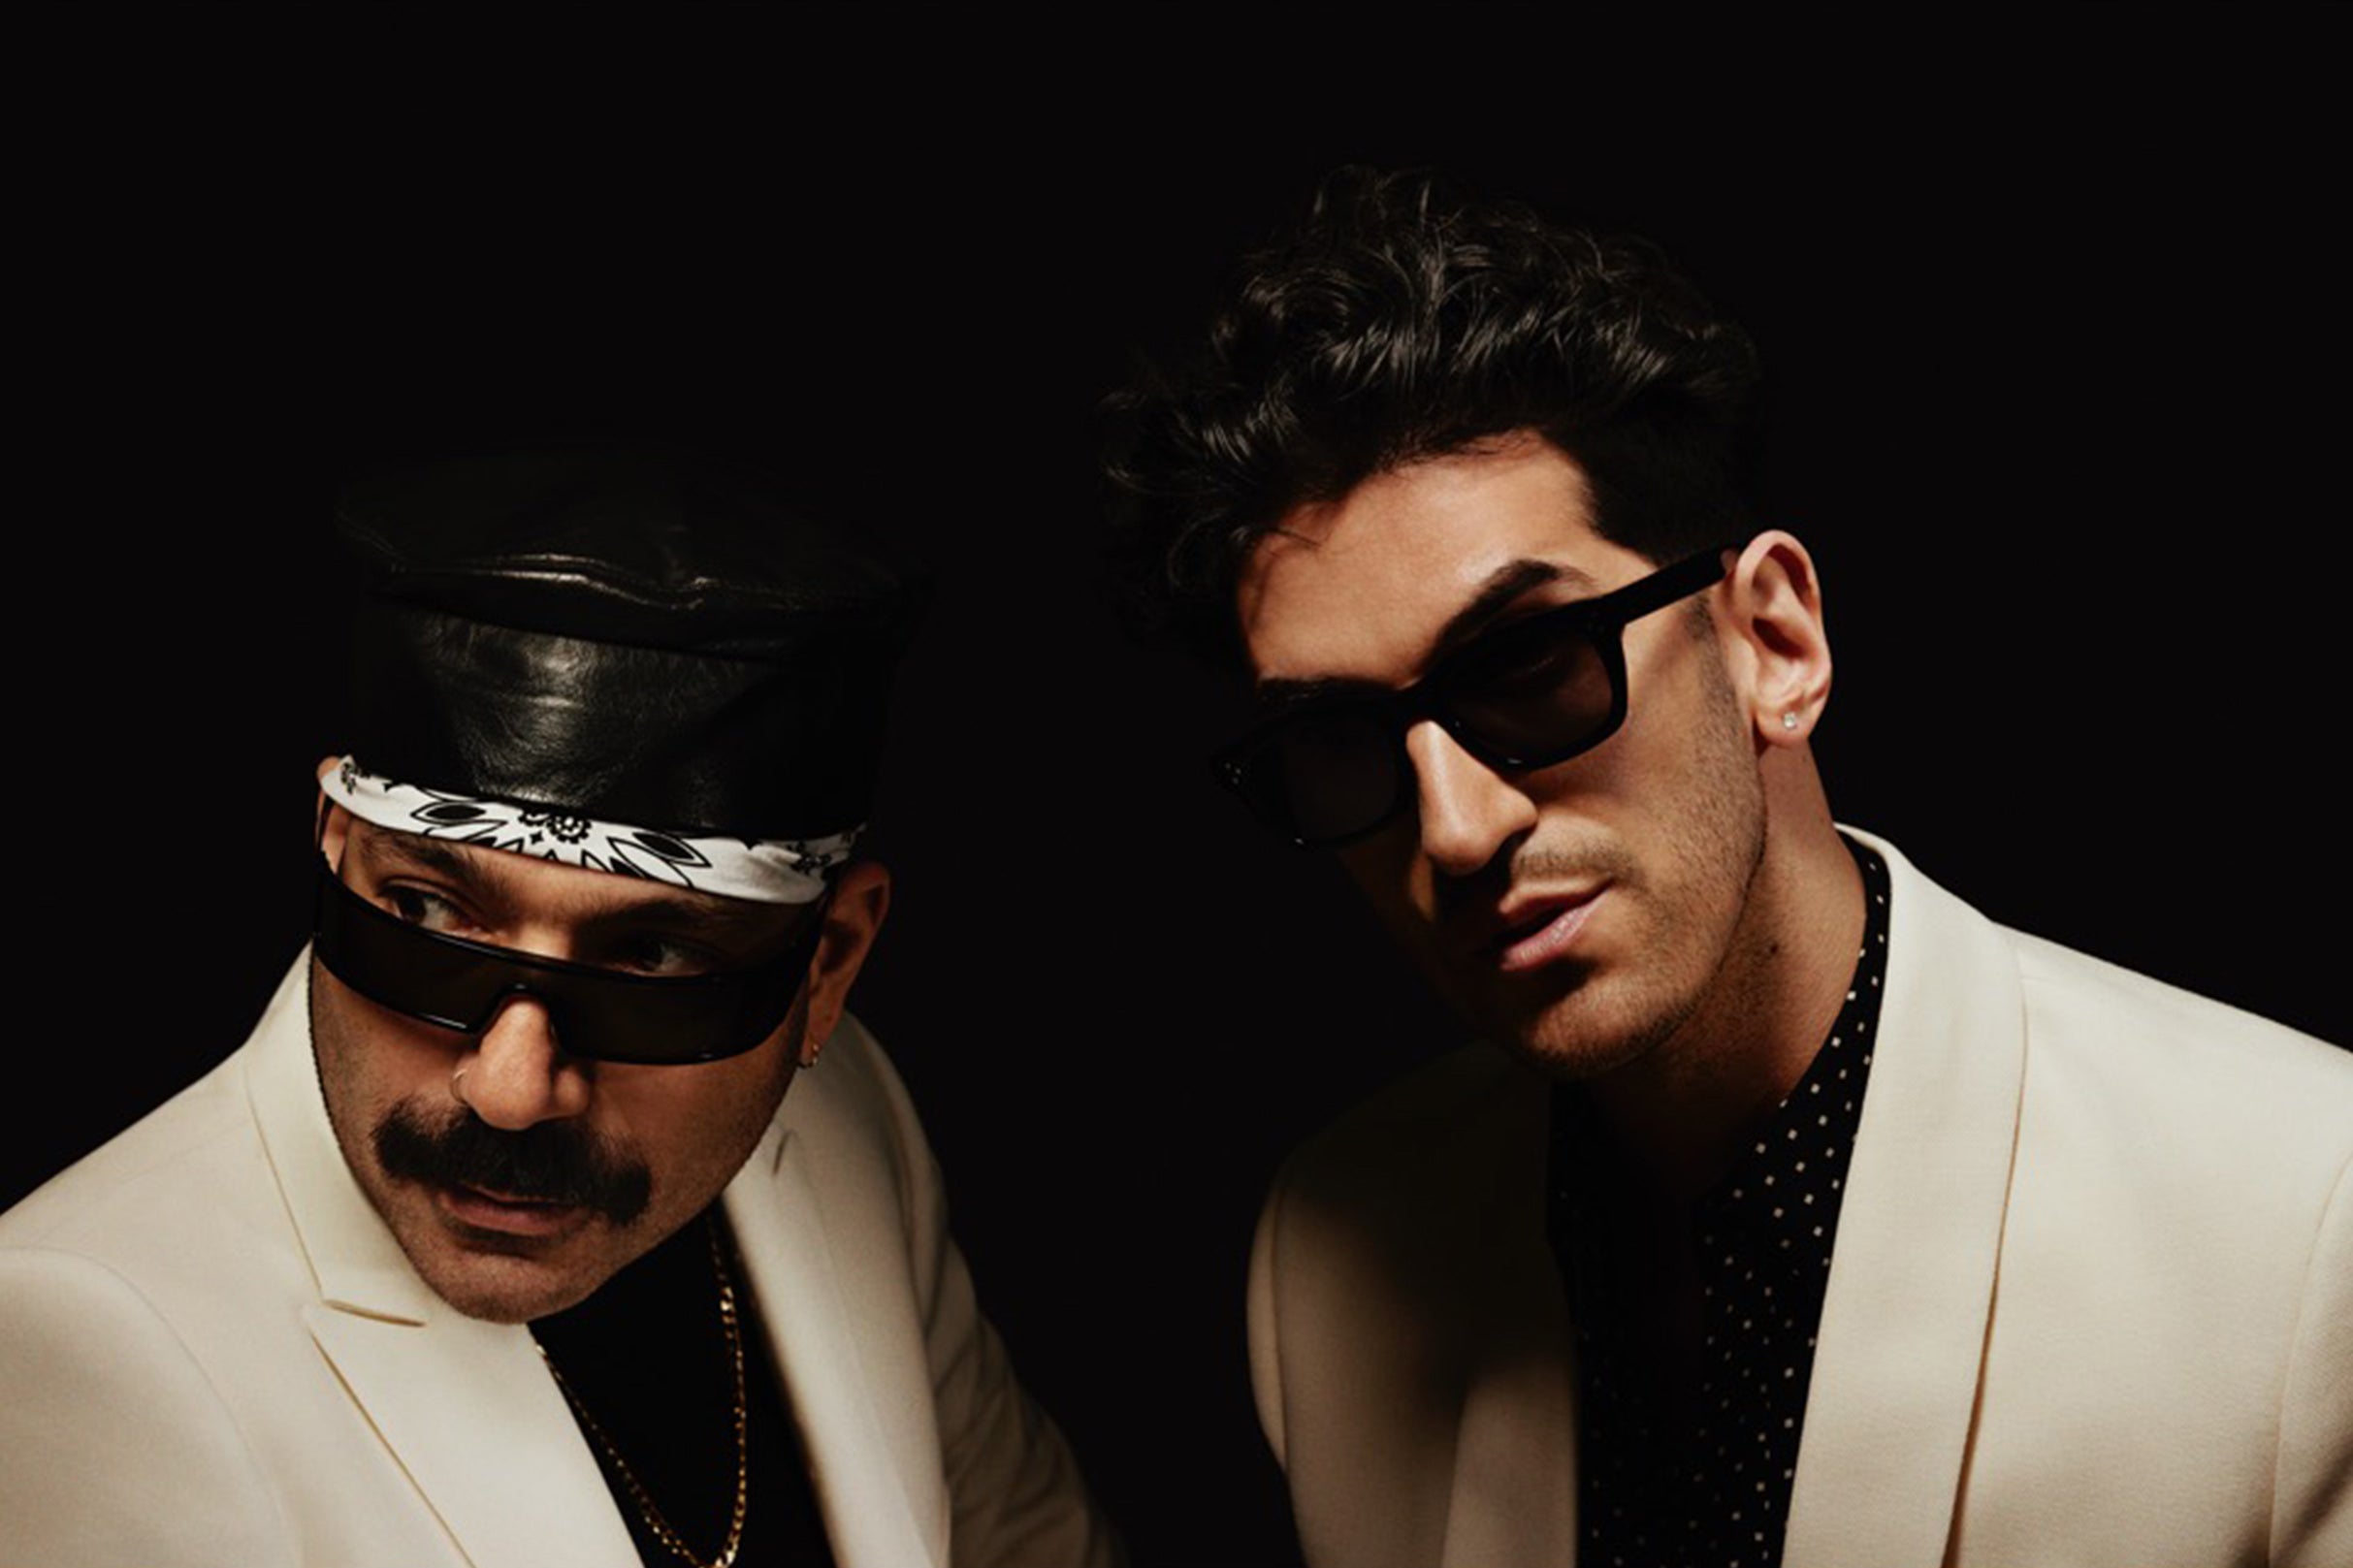 Chromeo at TPC River Highlands - Cromwell, CT 06416